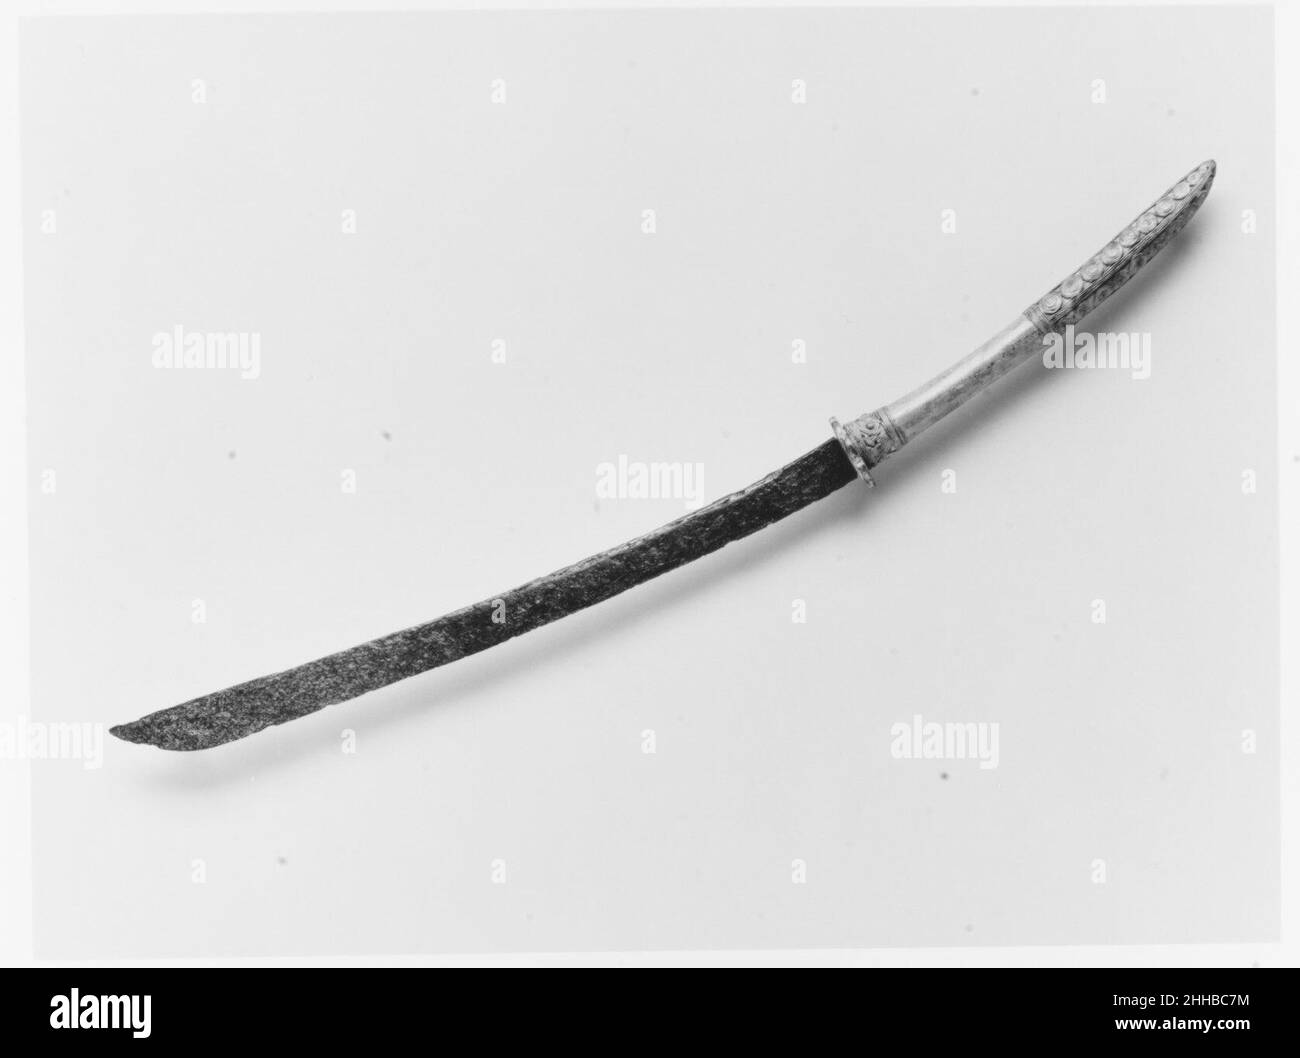 Short Sword Black and White Stock Photos & Images - Alamy